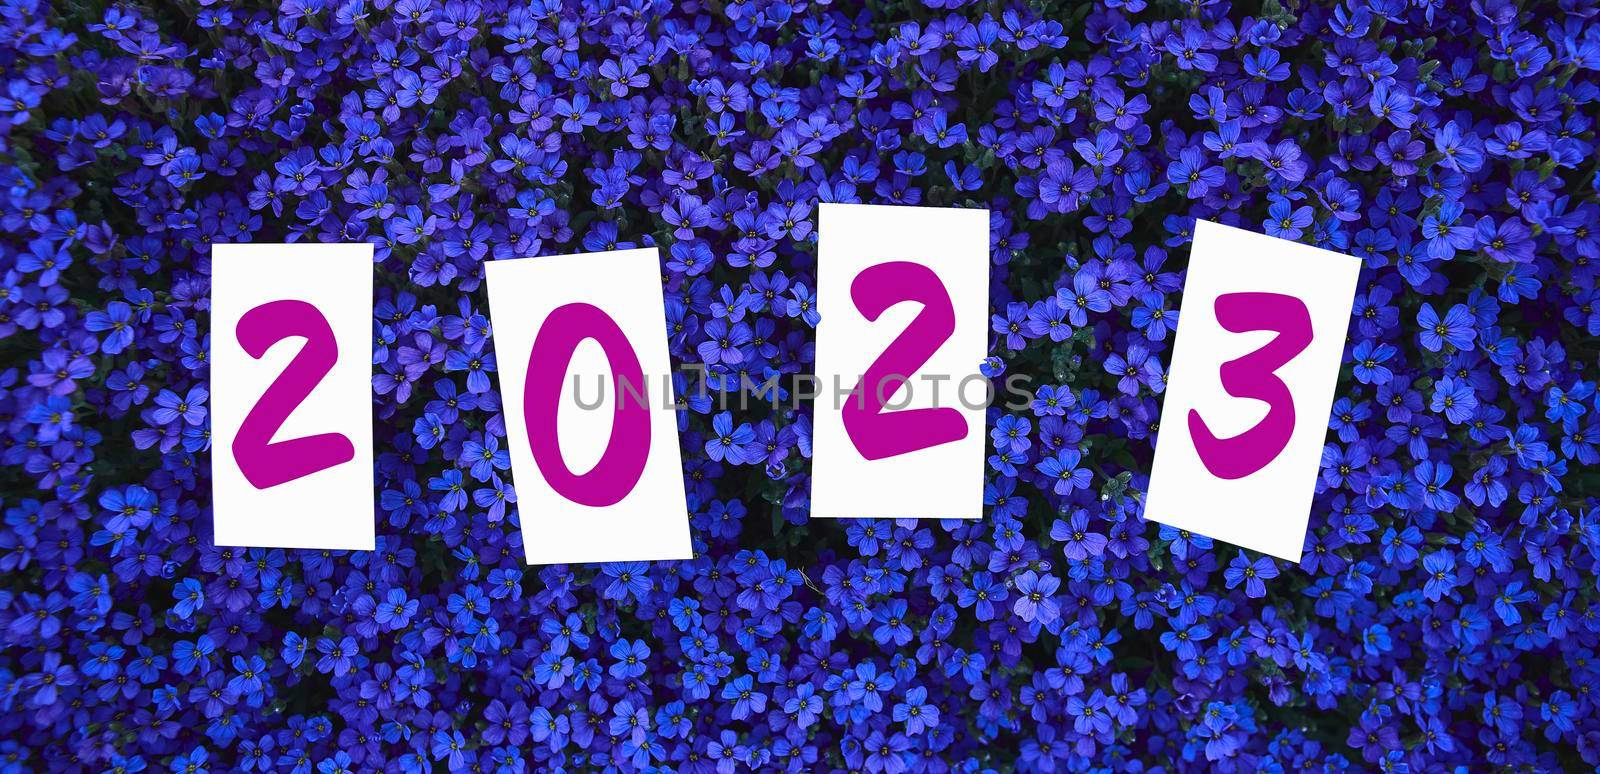 New year background concept, blue flowers with 2023 year cards on blue background. by Hil